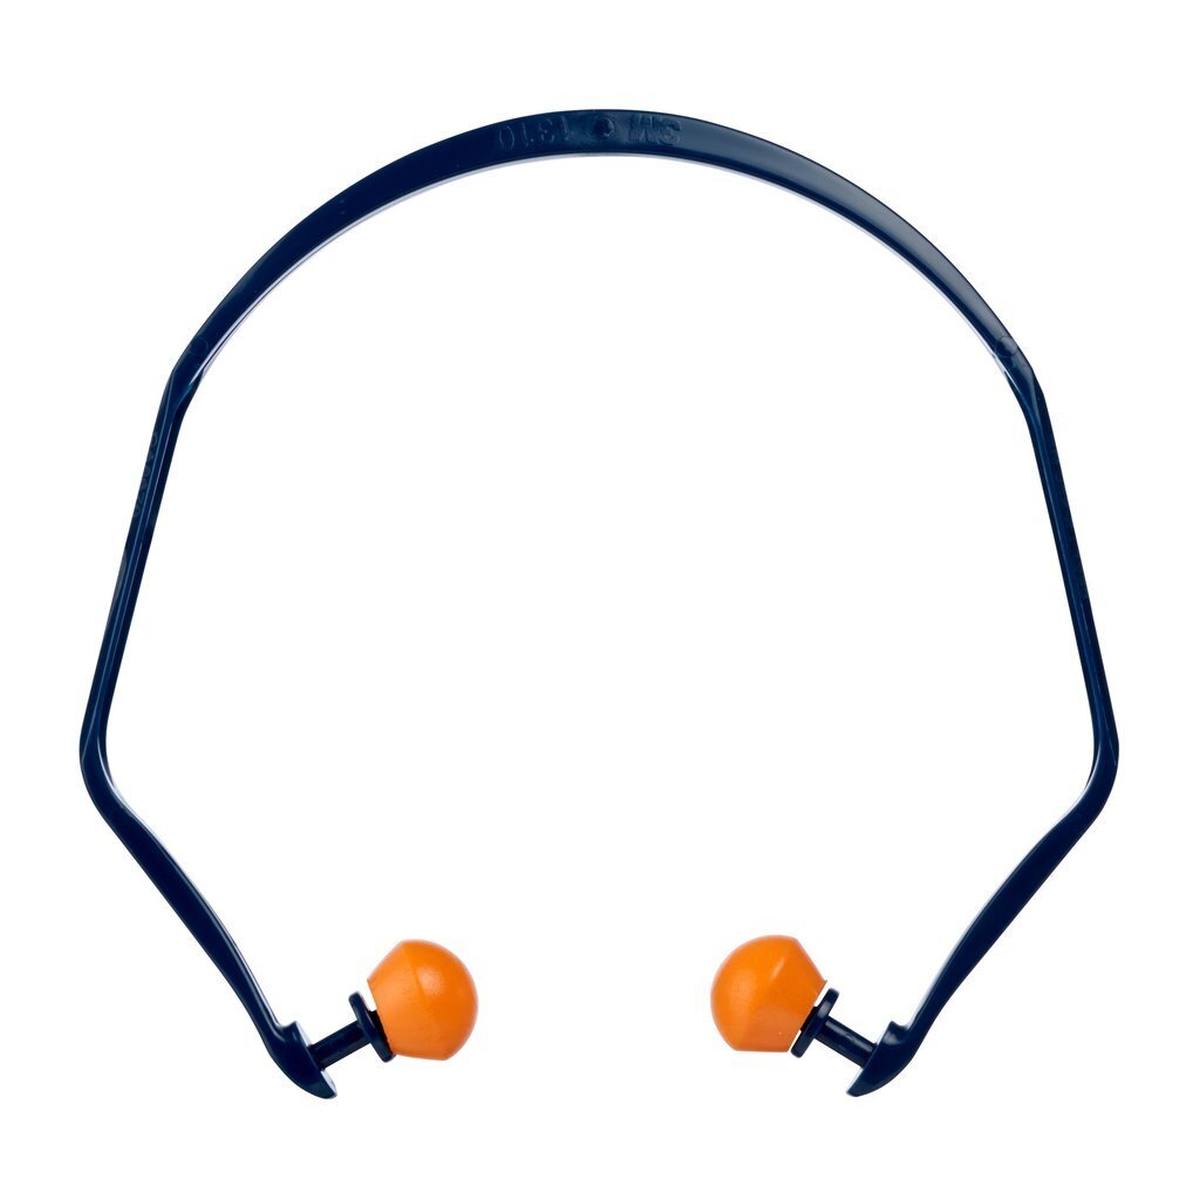 3M 1310 ear muffs, particularly comfortable thanks to the elastic temple design, SNR = 26 dB